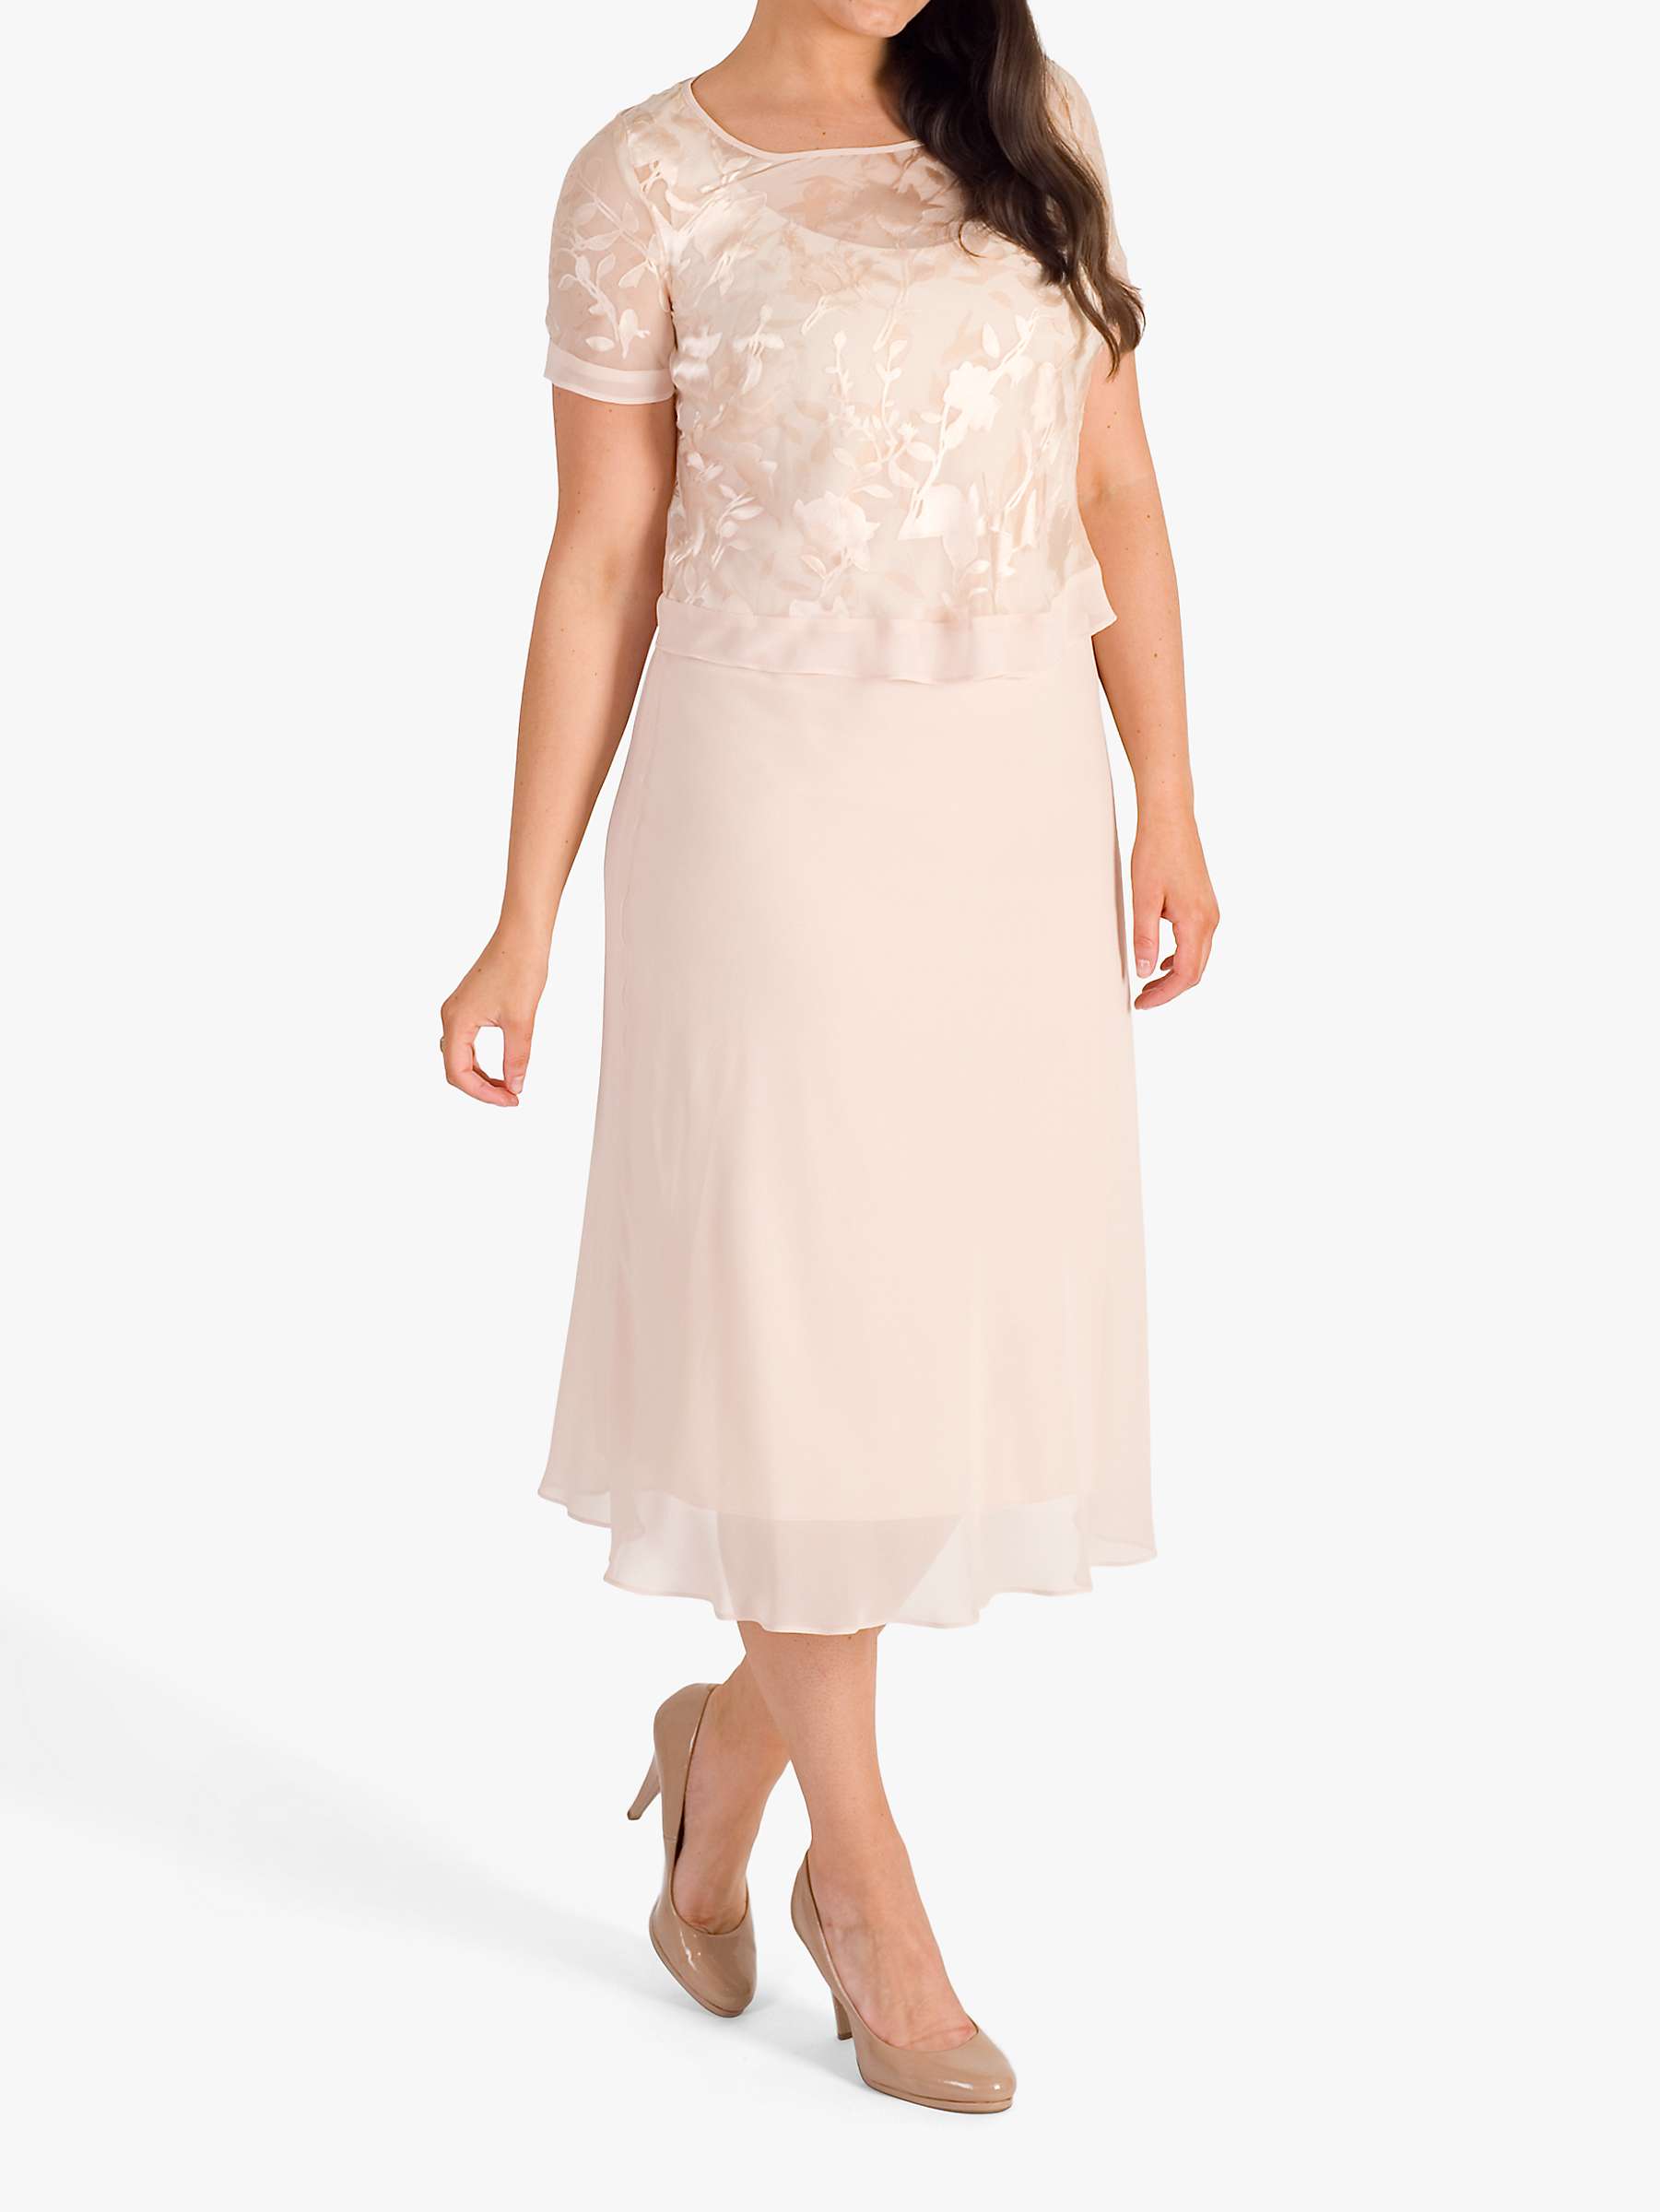 Buy chesca Chiffon Dress with Overtop, Blush Online at johnlewis.com